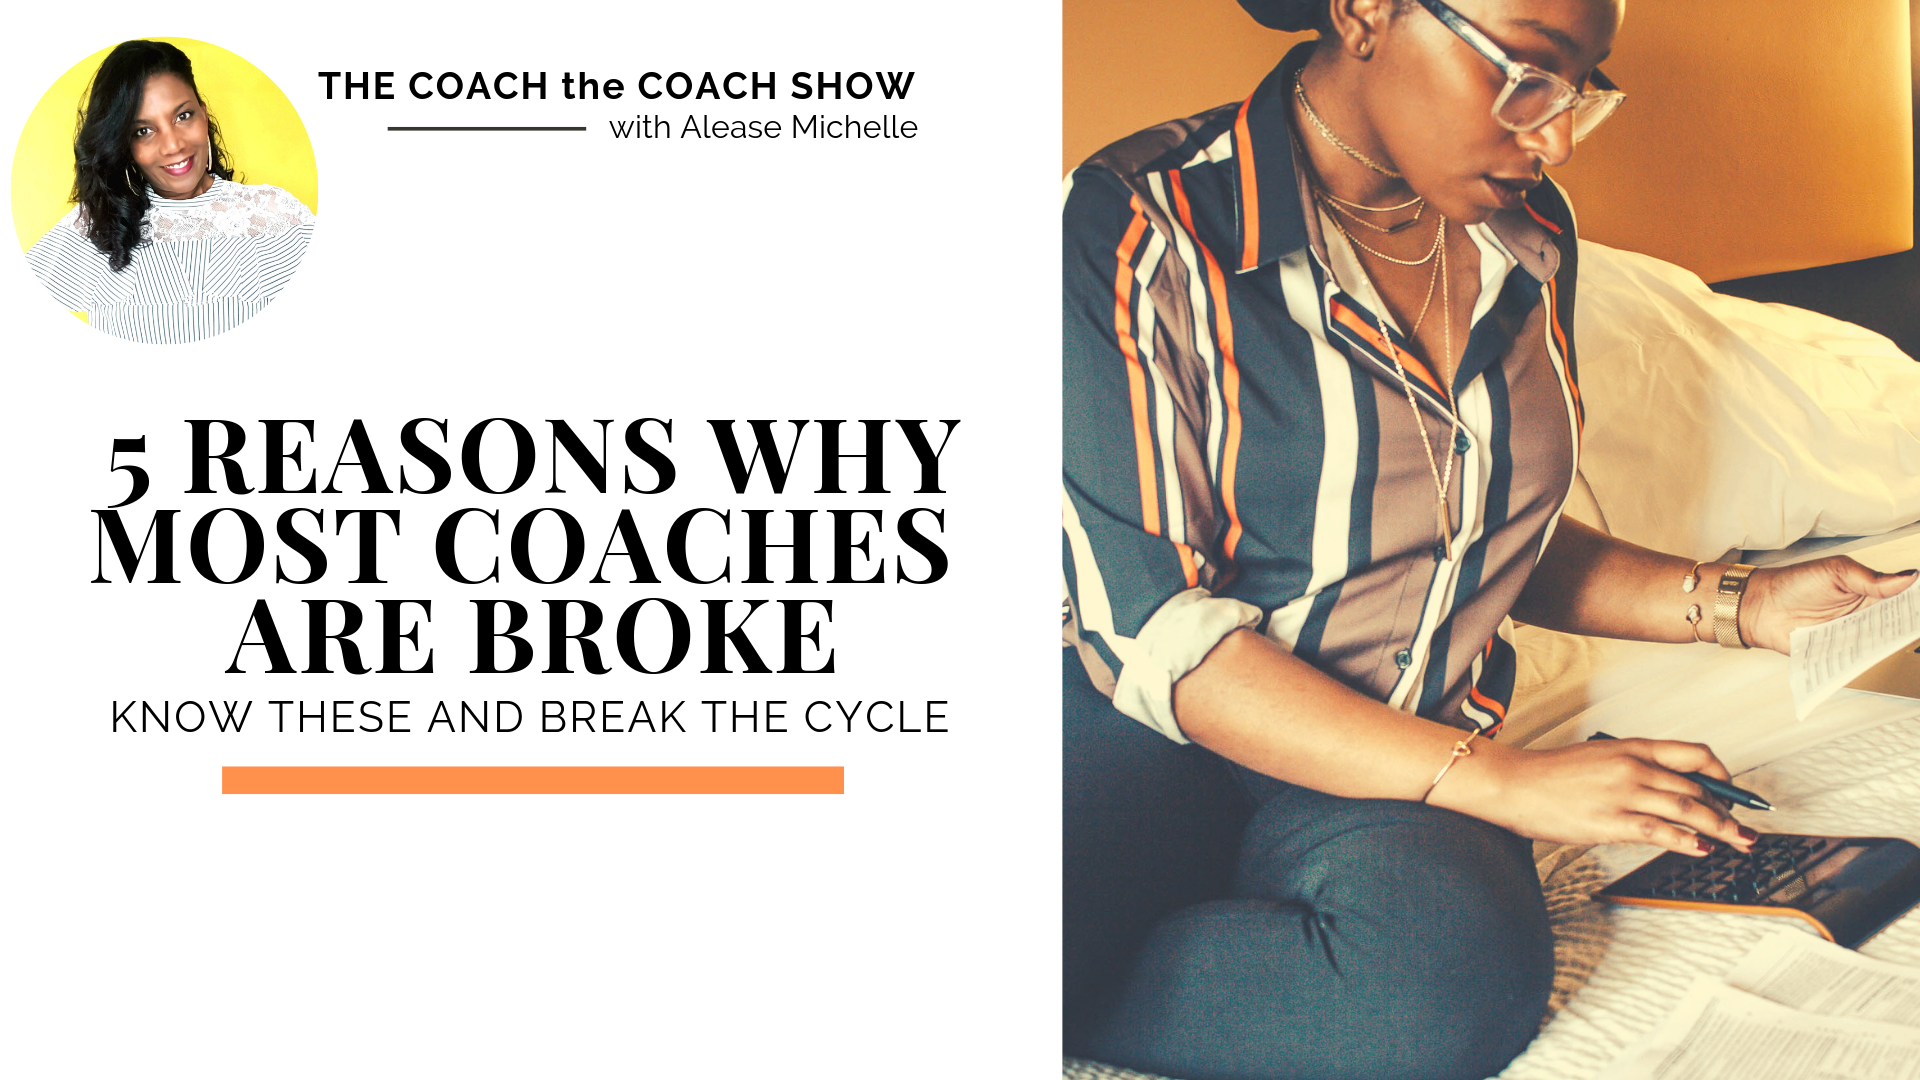 Reasons Why Most Coaches are Broke